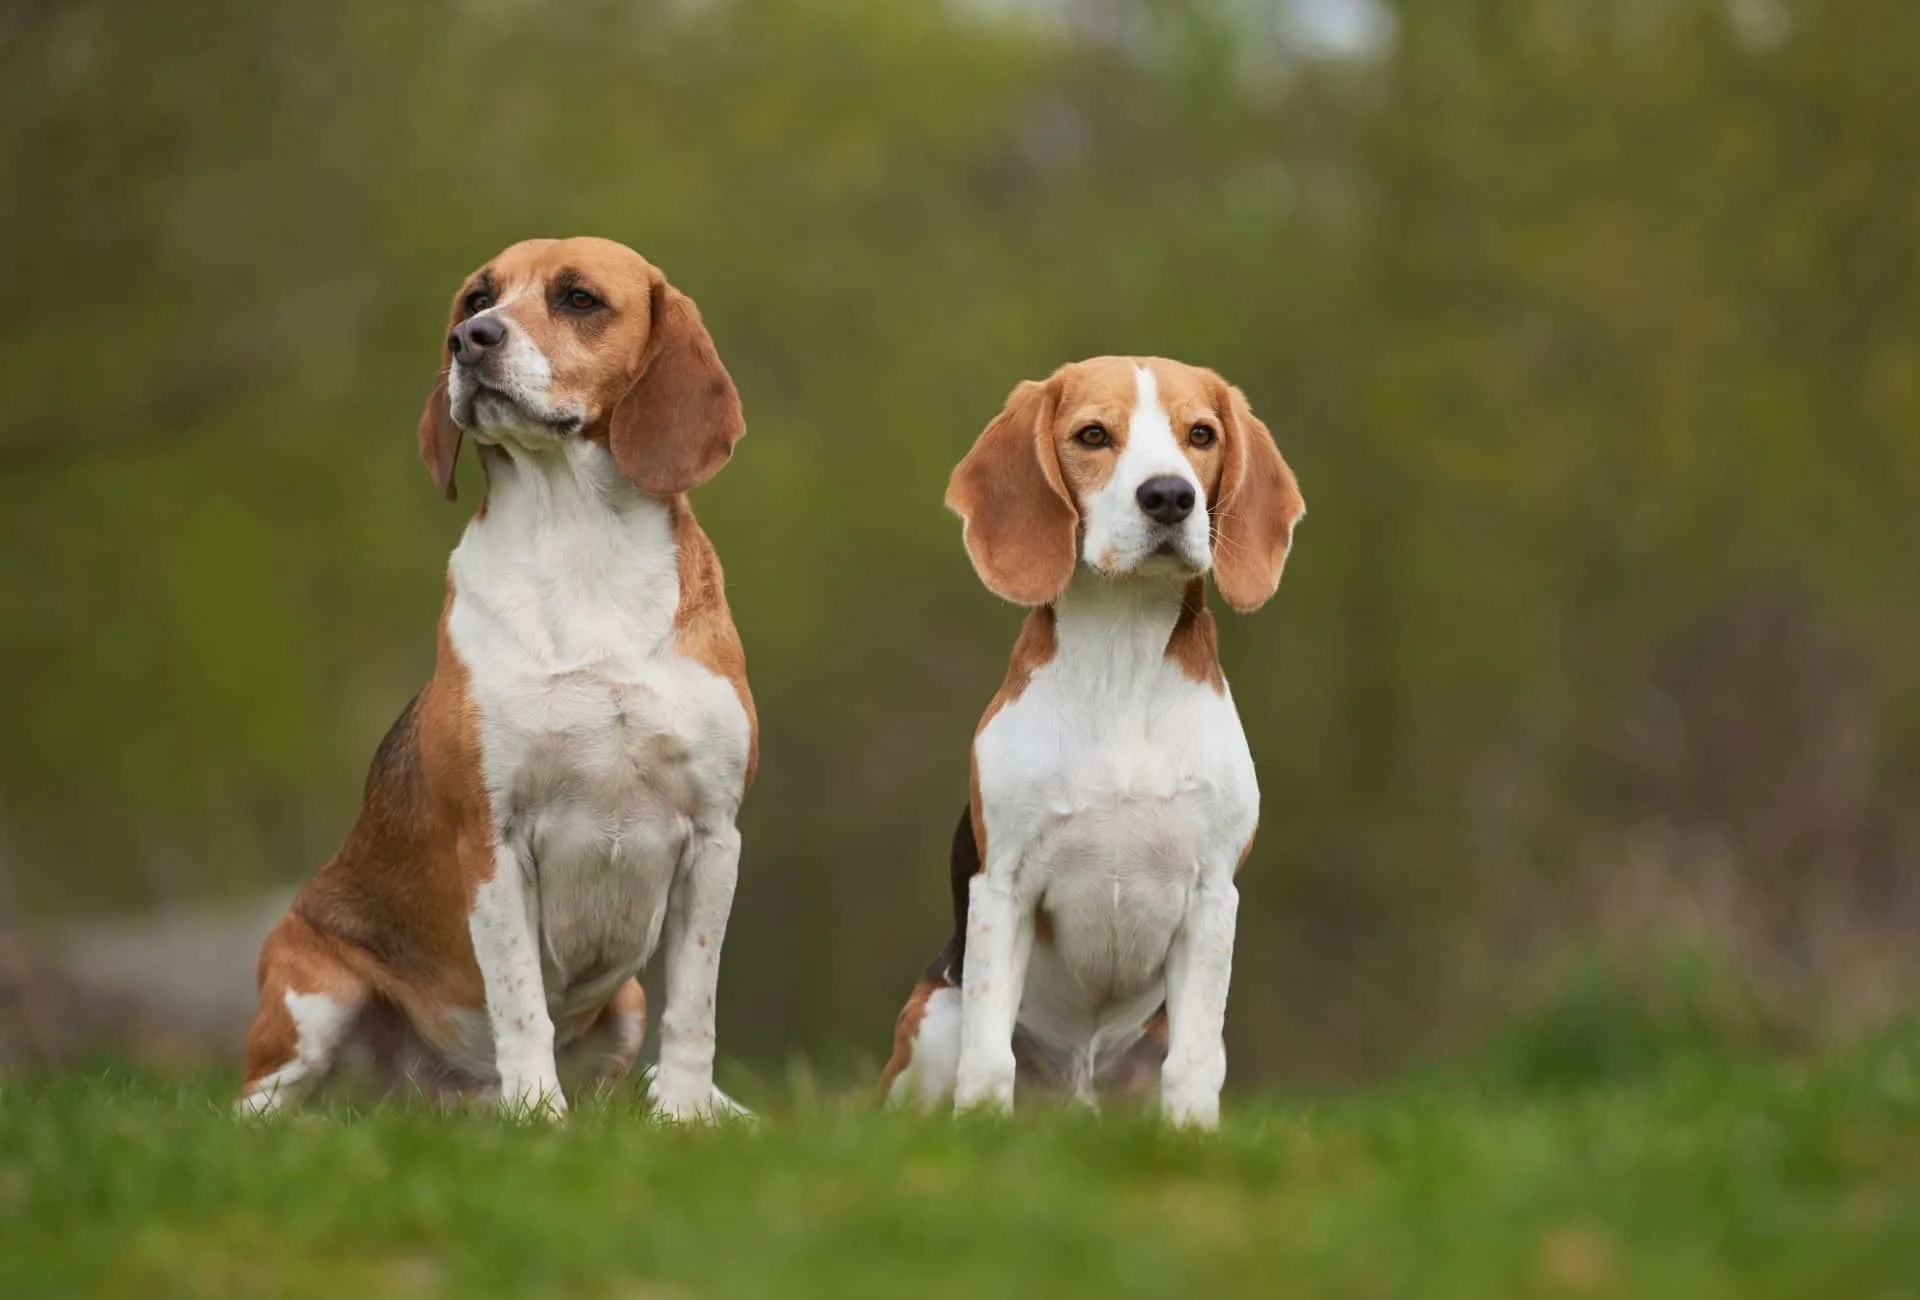 Senior Beagle next to a younger Beagle on a grassy field.